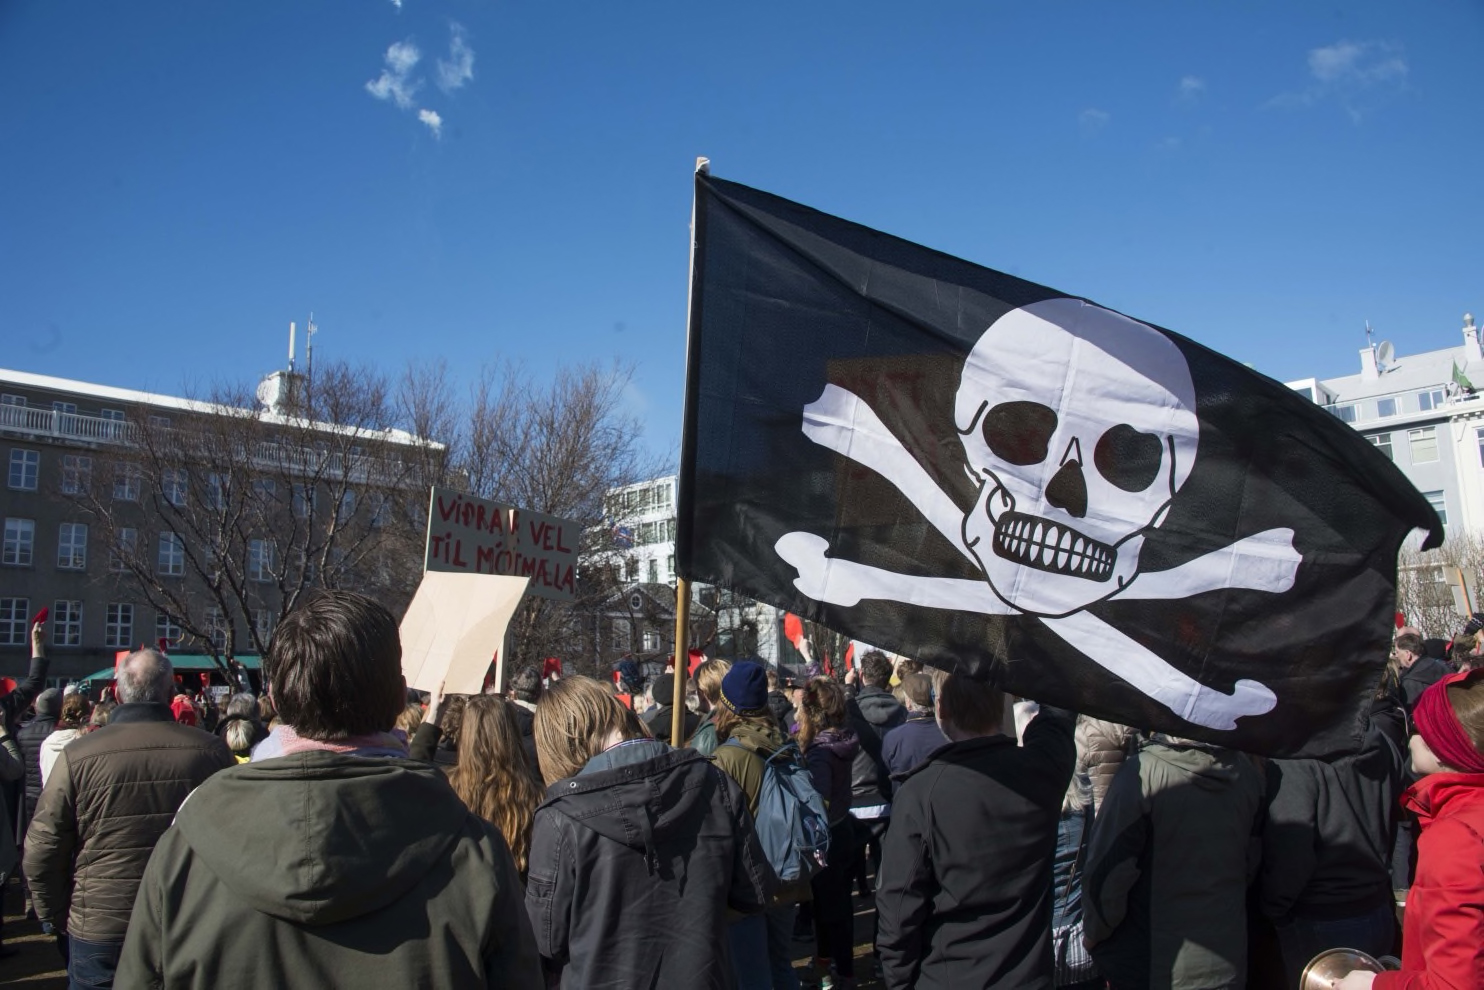 Iceland democracy, digital revolution, Icelandic Constitution, bank bailouts, Pirate Party